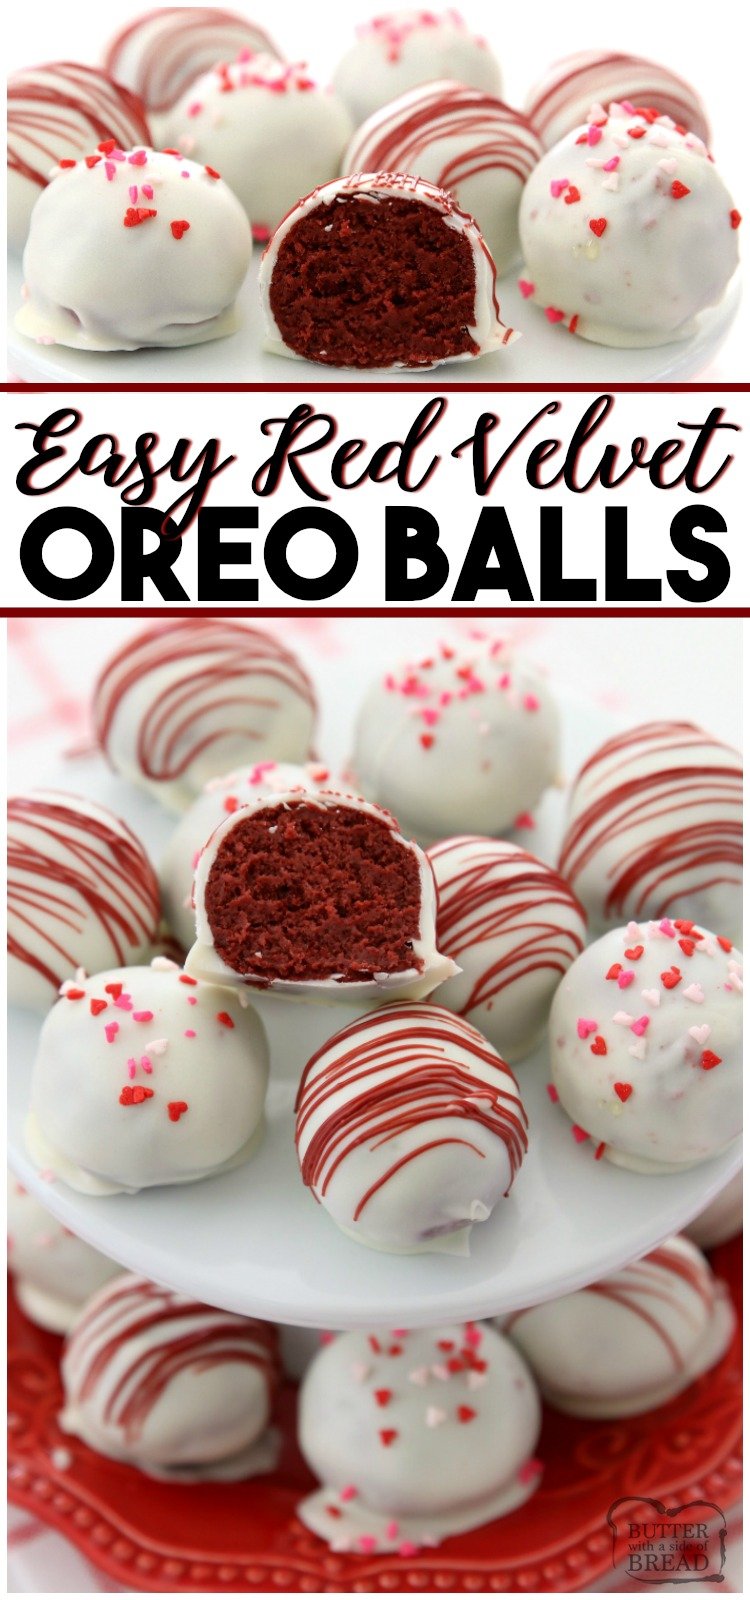 Red Velvet Oreo Balls made with just 3 ingredients & perfect for Valentine's Day! Made in minutes and so delicious, no one can guess they're made with Oreo cookies! #redvelvet #oreo #truffles #candy #chocolate #ValentinesDay #dessert #recipe from BUTTER WITH A SIDE OF BREAD